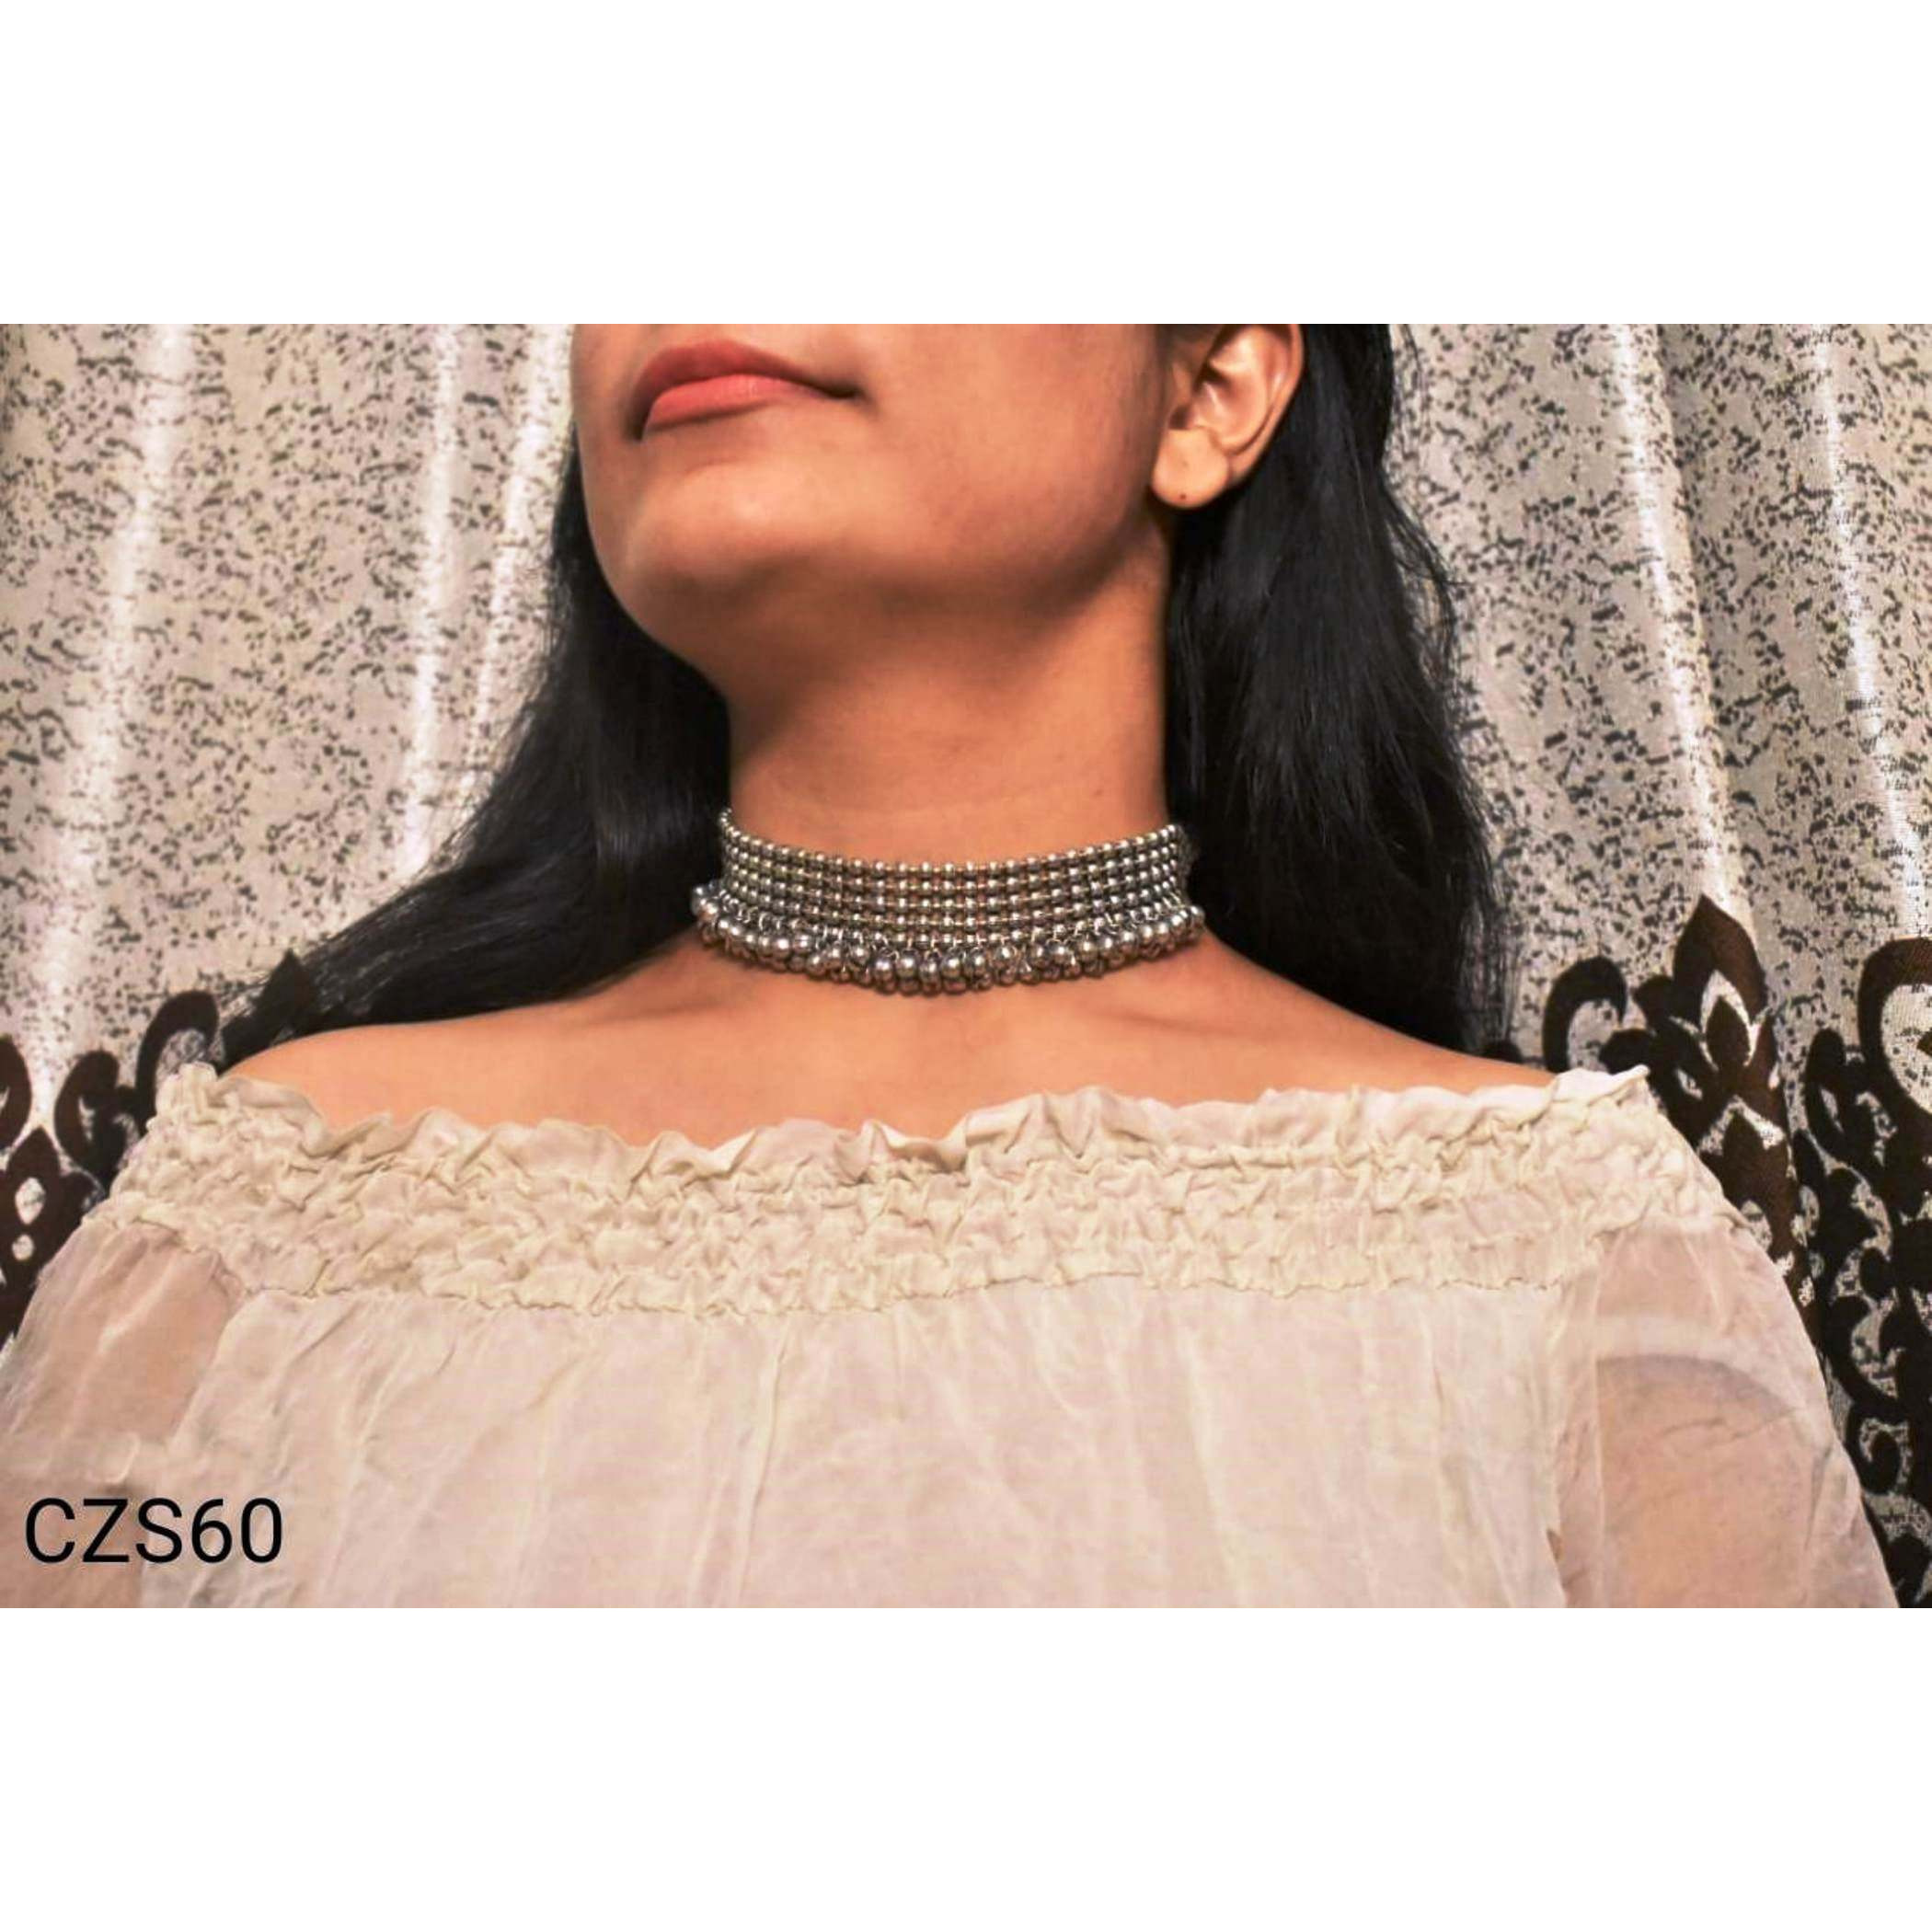 Oxidized choker necklace, Indian jewellery, German silver handmade choker, boho gypsy ethnic choker, gifts for her, anniversary gift